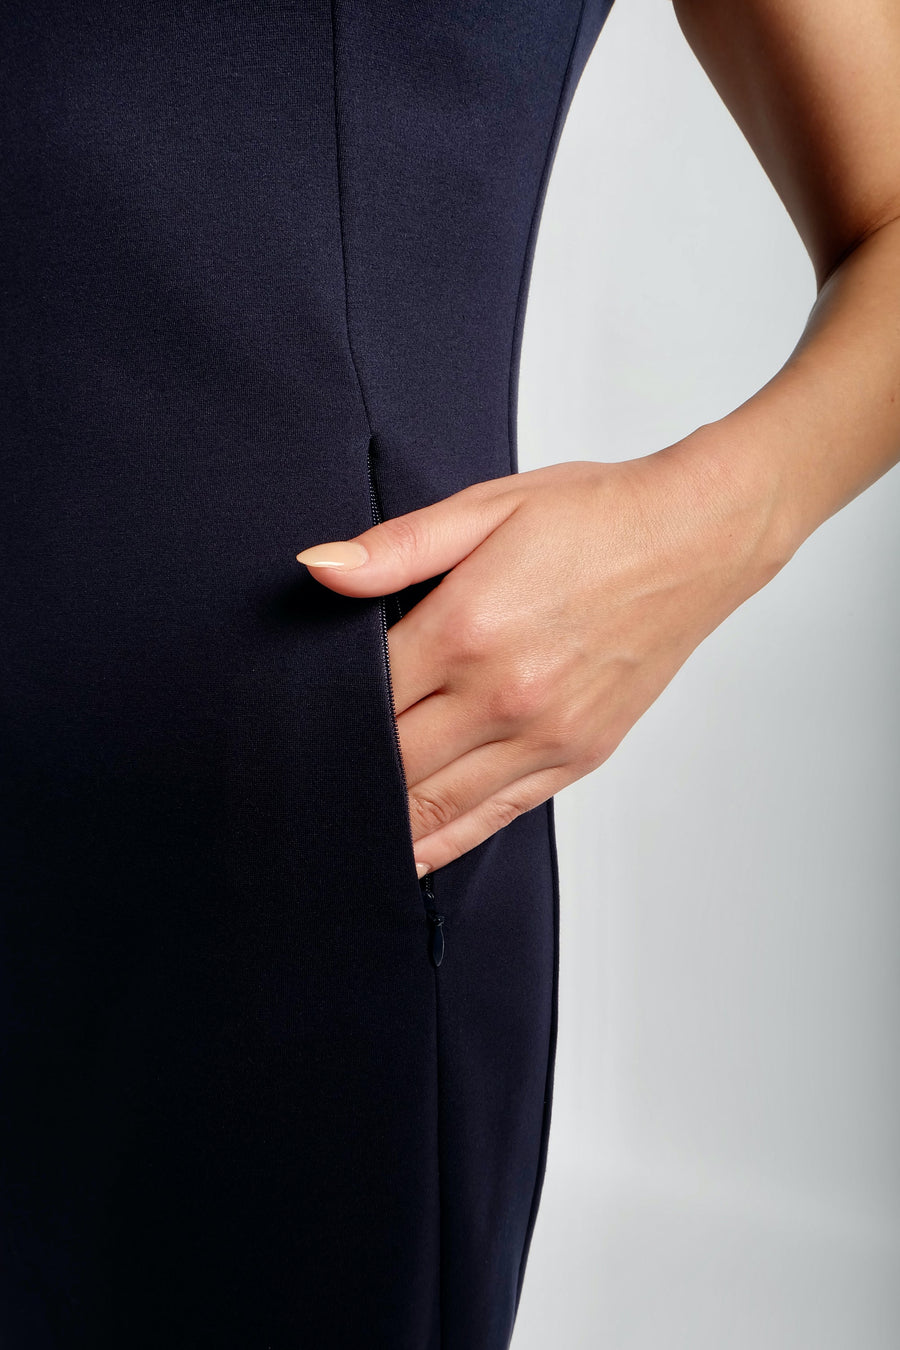 womans hand in dress pocket